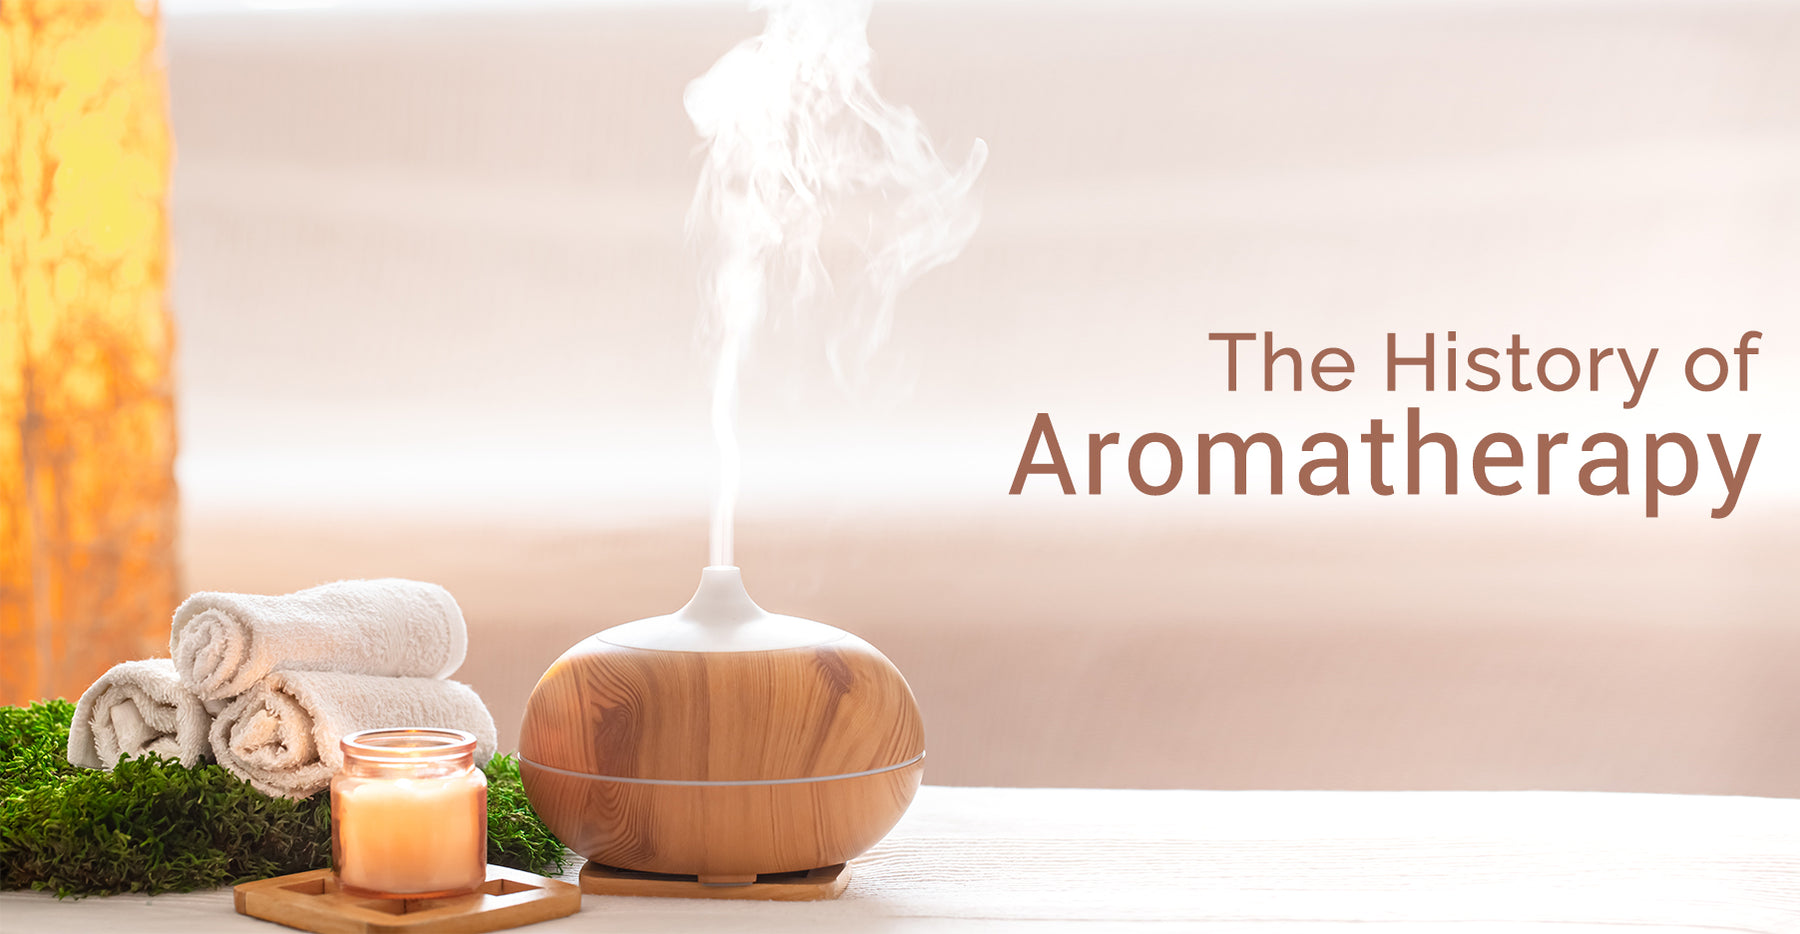 The History of Aromatherapy